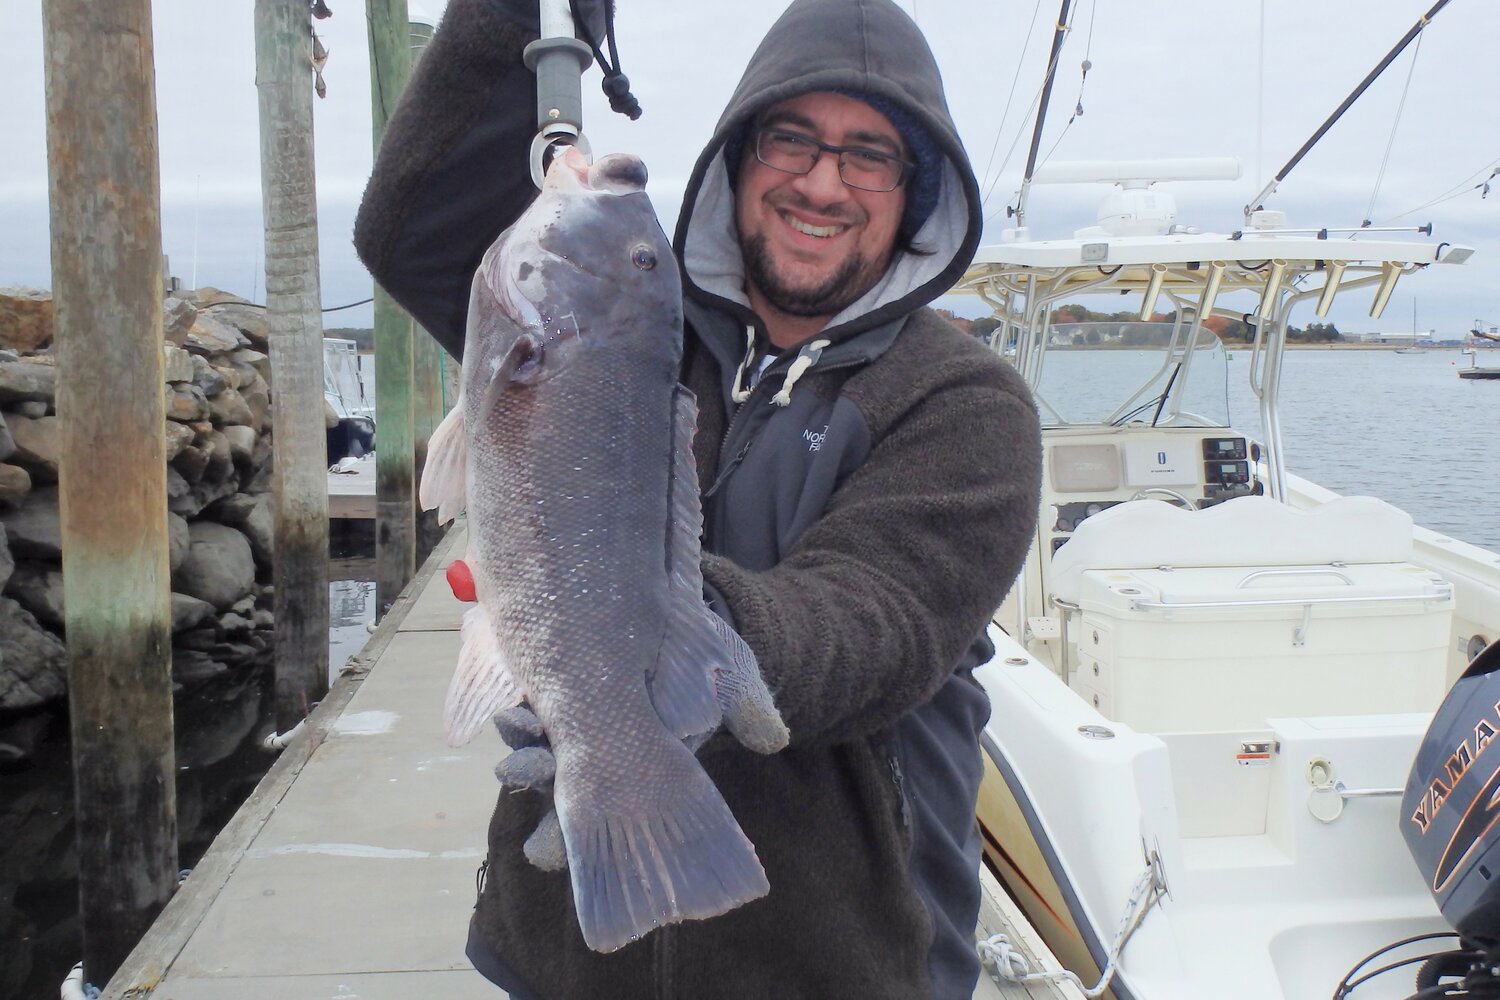 Angler Geoff Monti had no trouble catching his limit of tautog off Newport last fall.